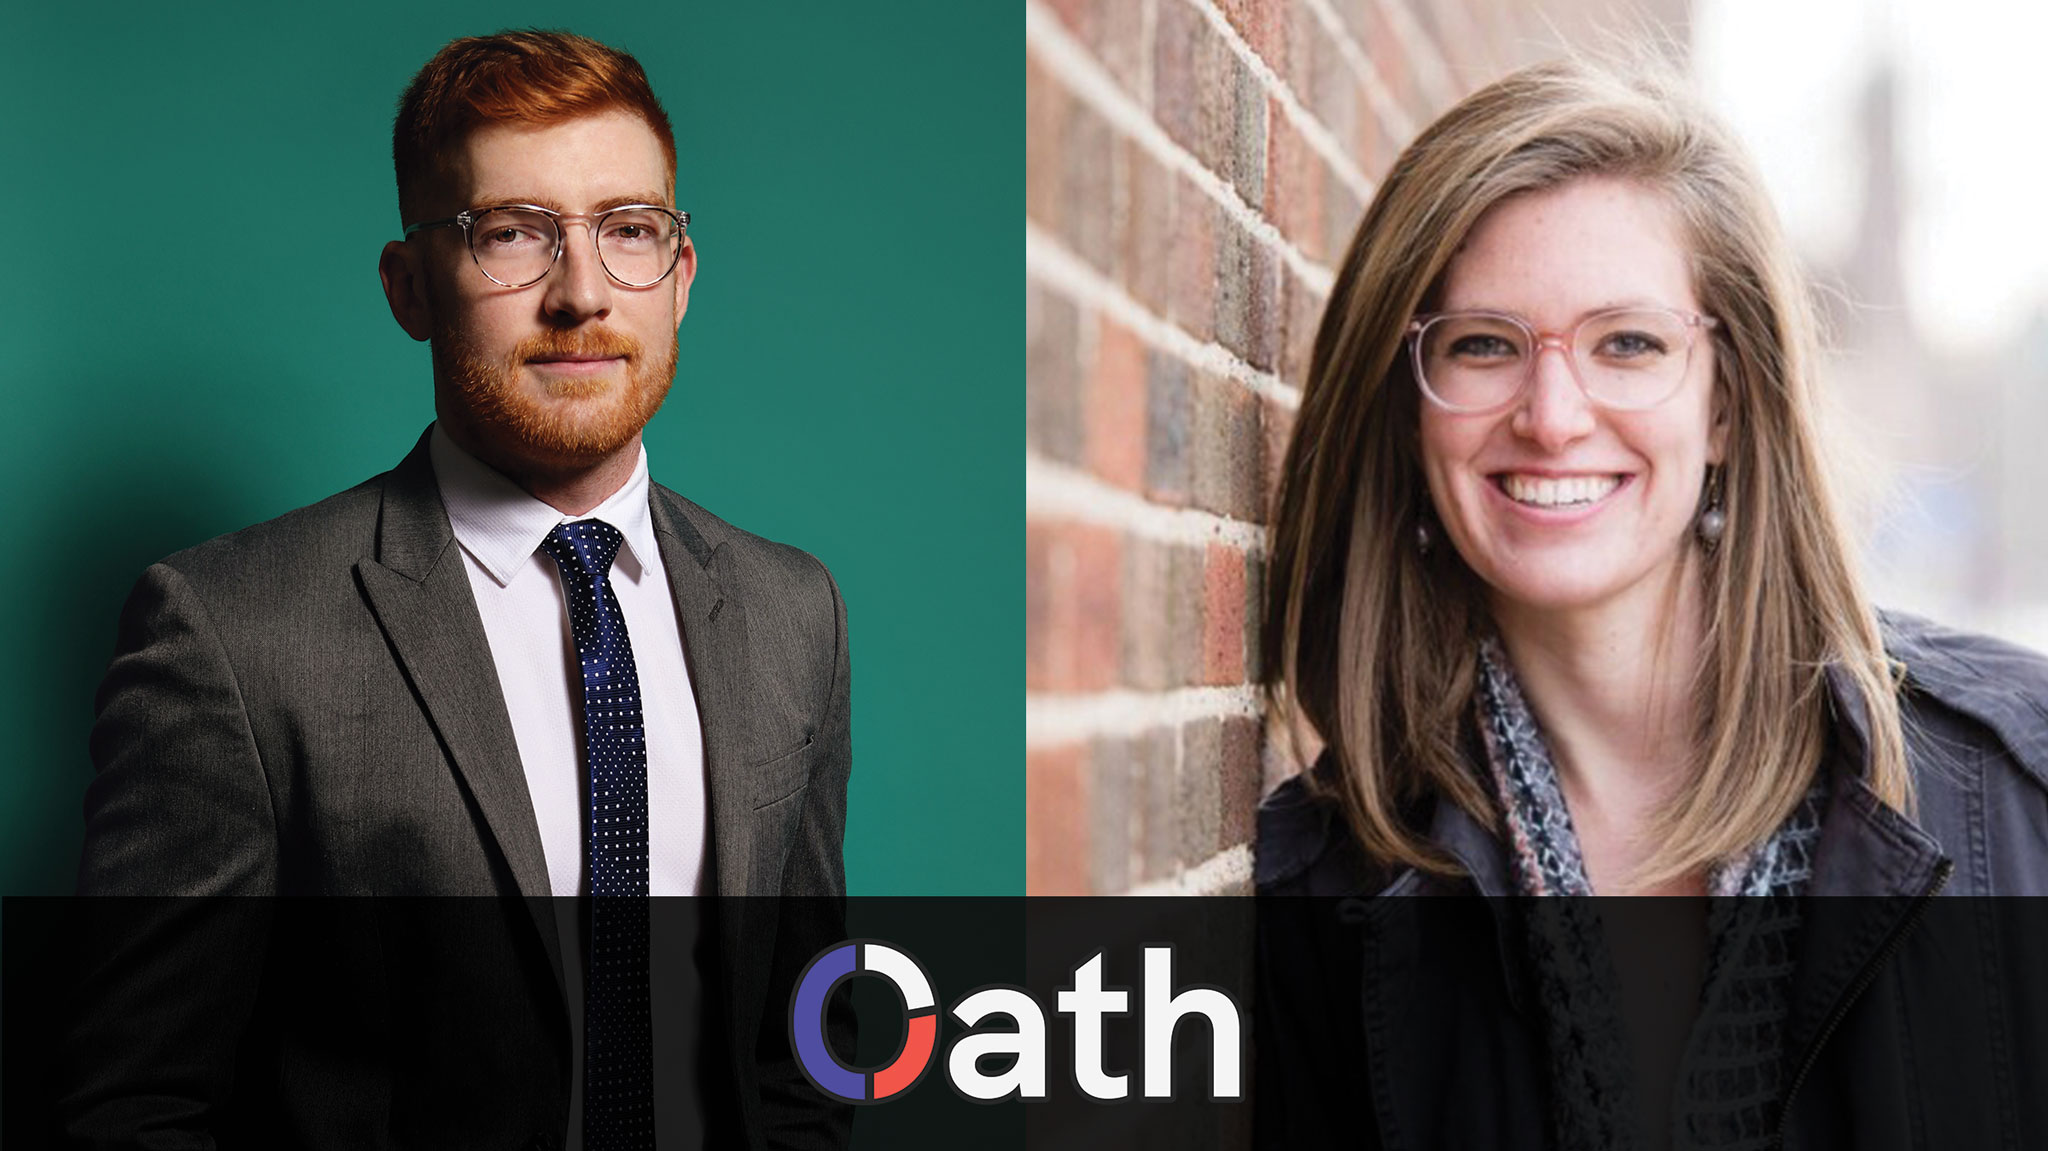 Cofounders of Oath, Brian Derrick and Taylor Ourada.